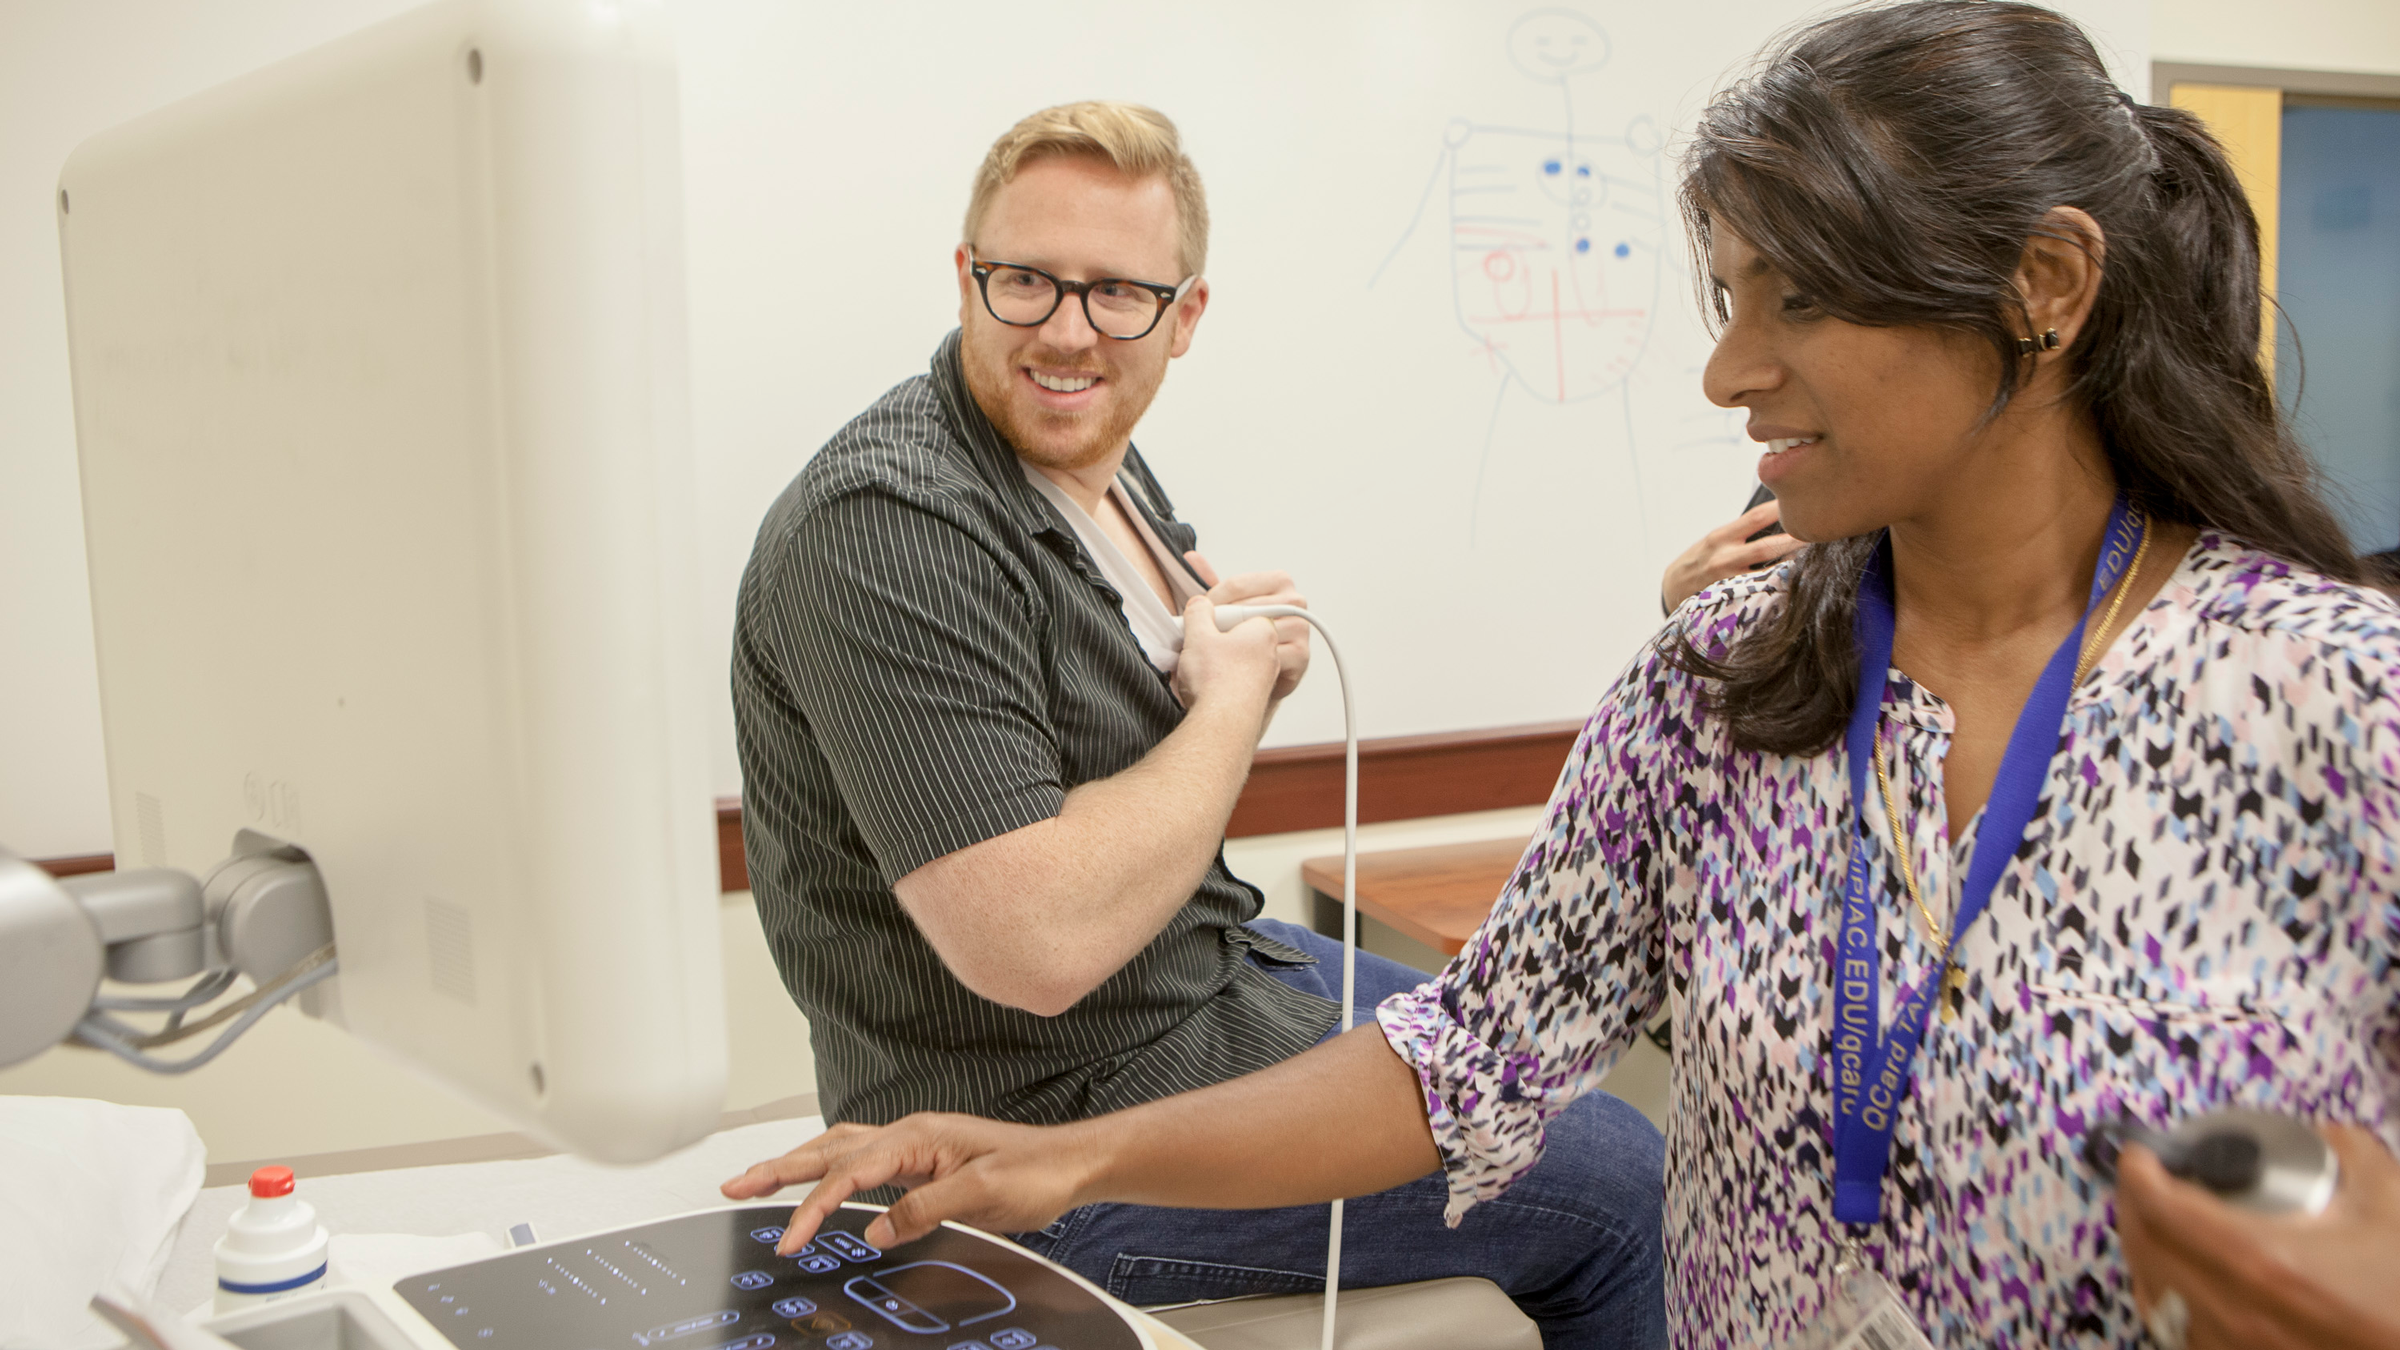 Dr. Professor Listy Thomas, right, instructs Cameron Harrison MD ’17 in sonogram techniques in the Center for Medicine, Nursing and Health Sciences. Thomas has been developing an interdisciplinary ultrasound curriculum with the School of Health Sciences.